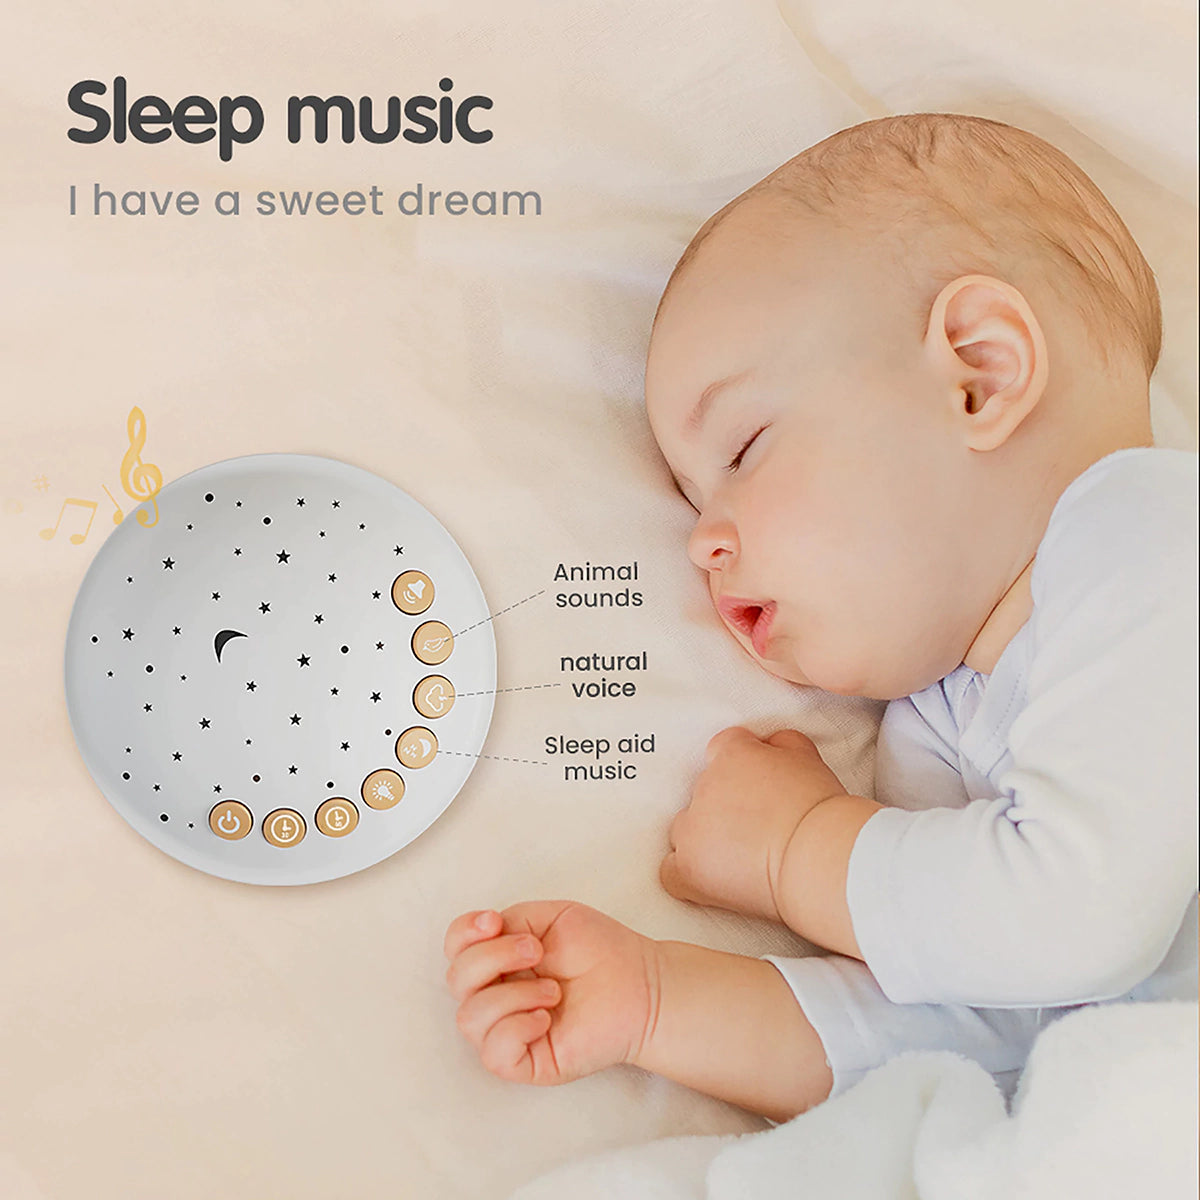 Musical toy for infant's bedtime routine